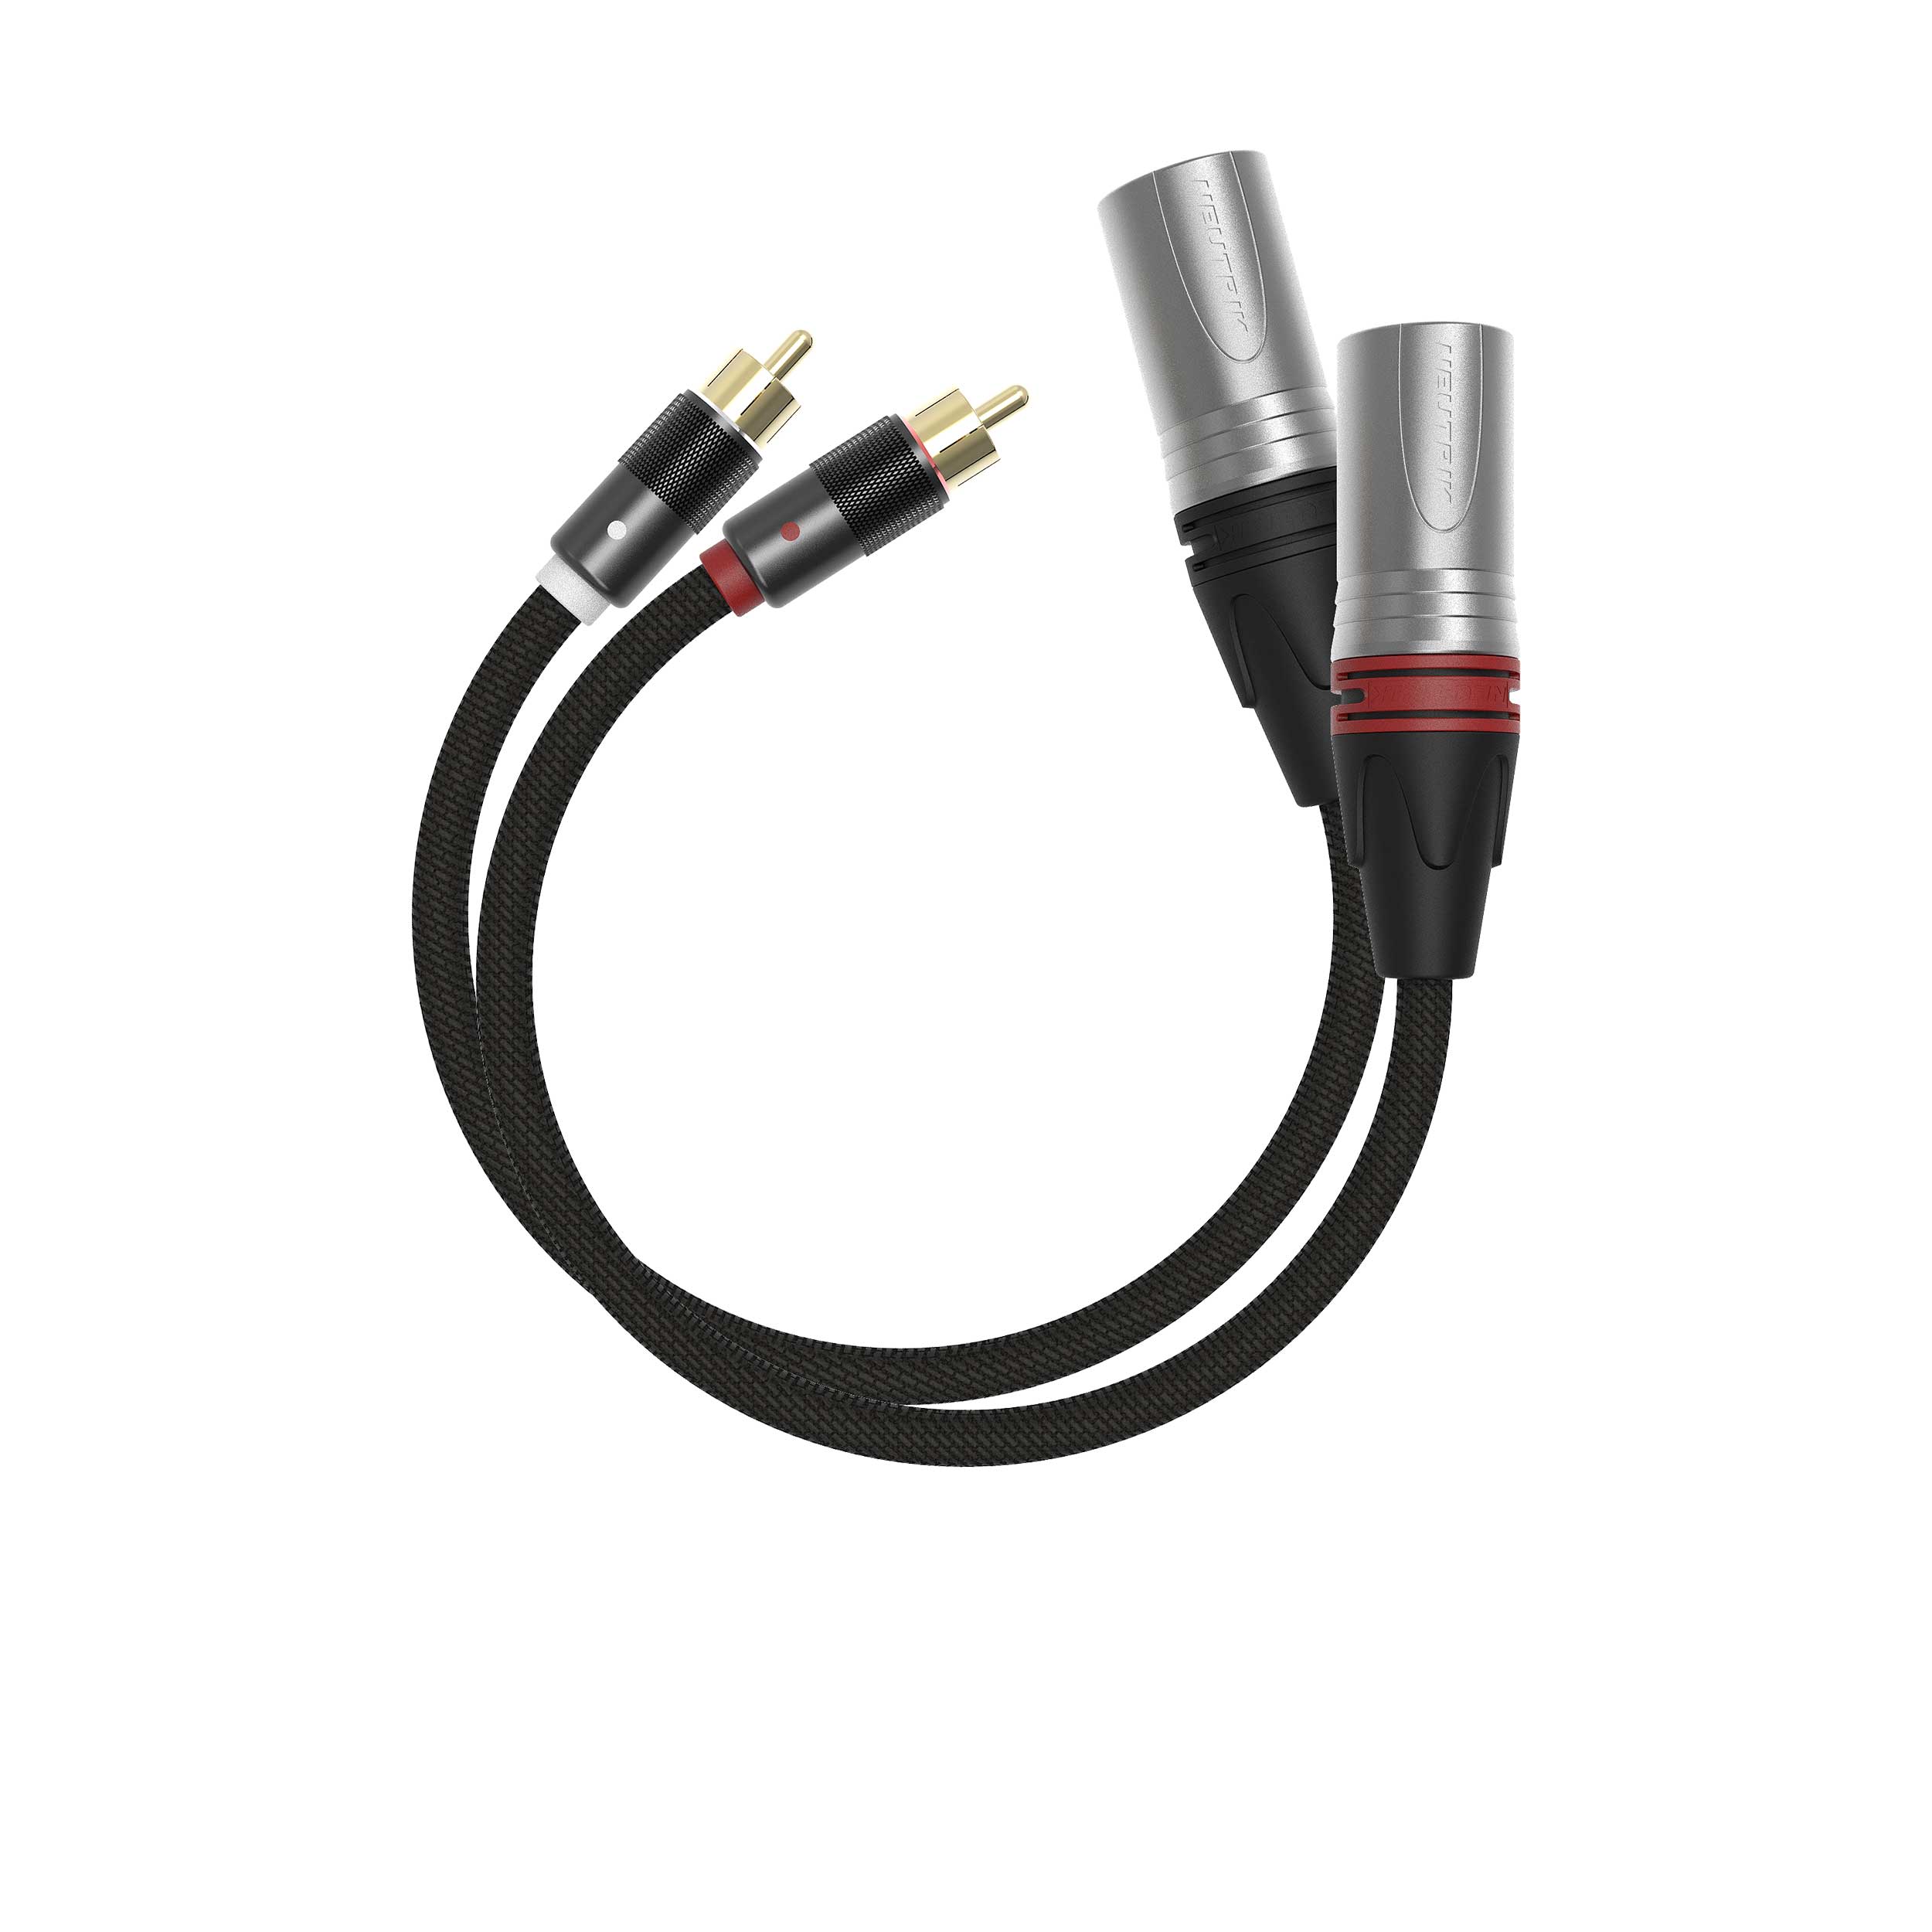 xlr_3_male_adapter_white_and_red